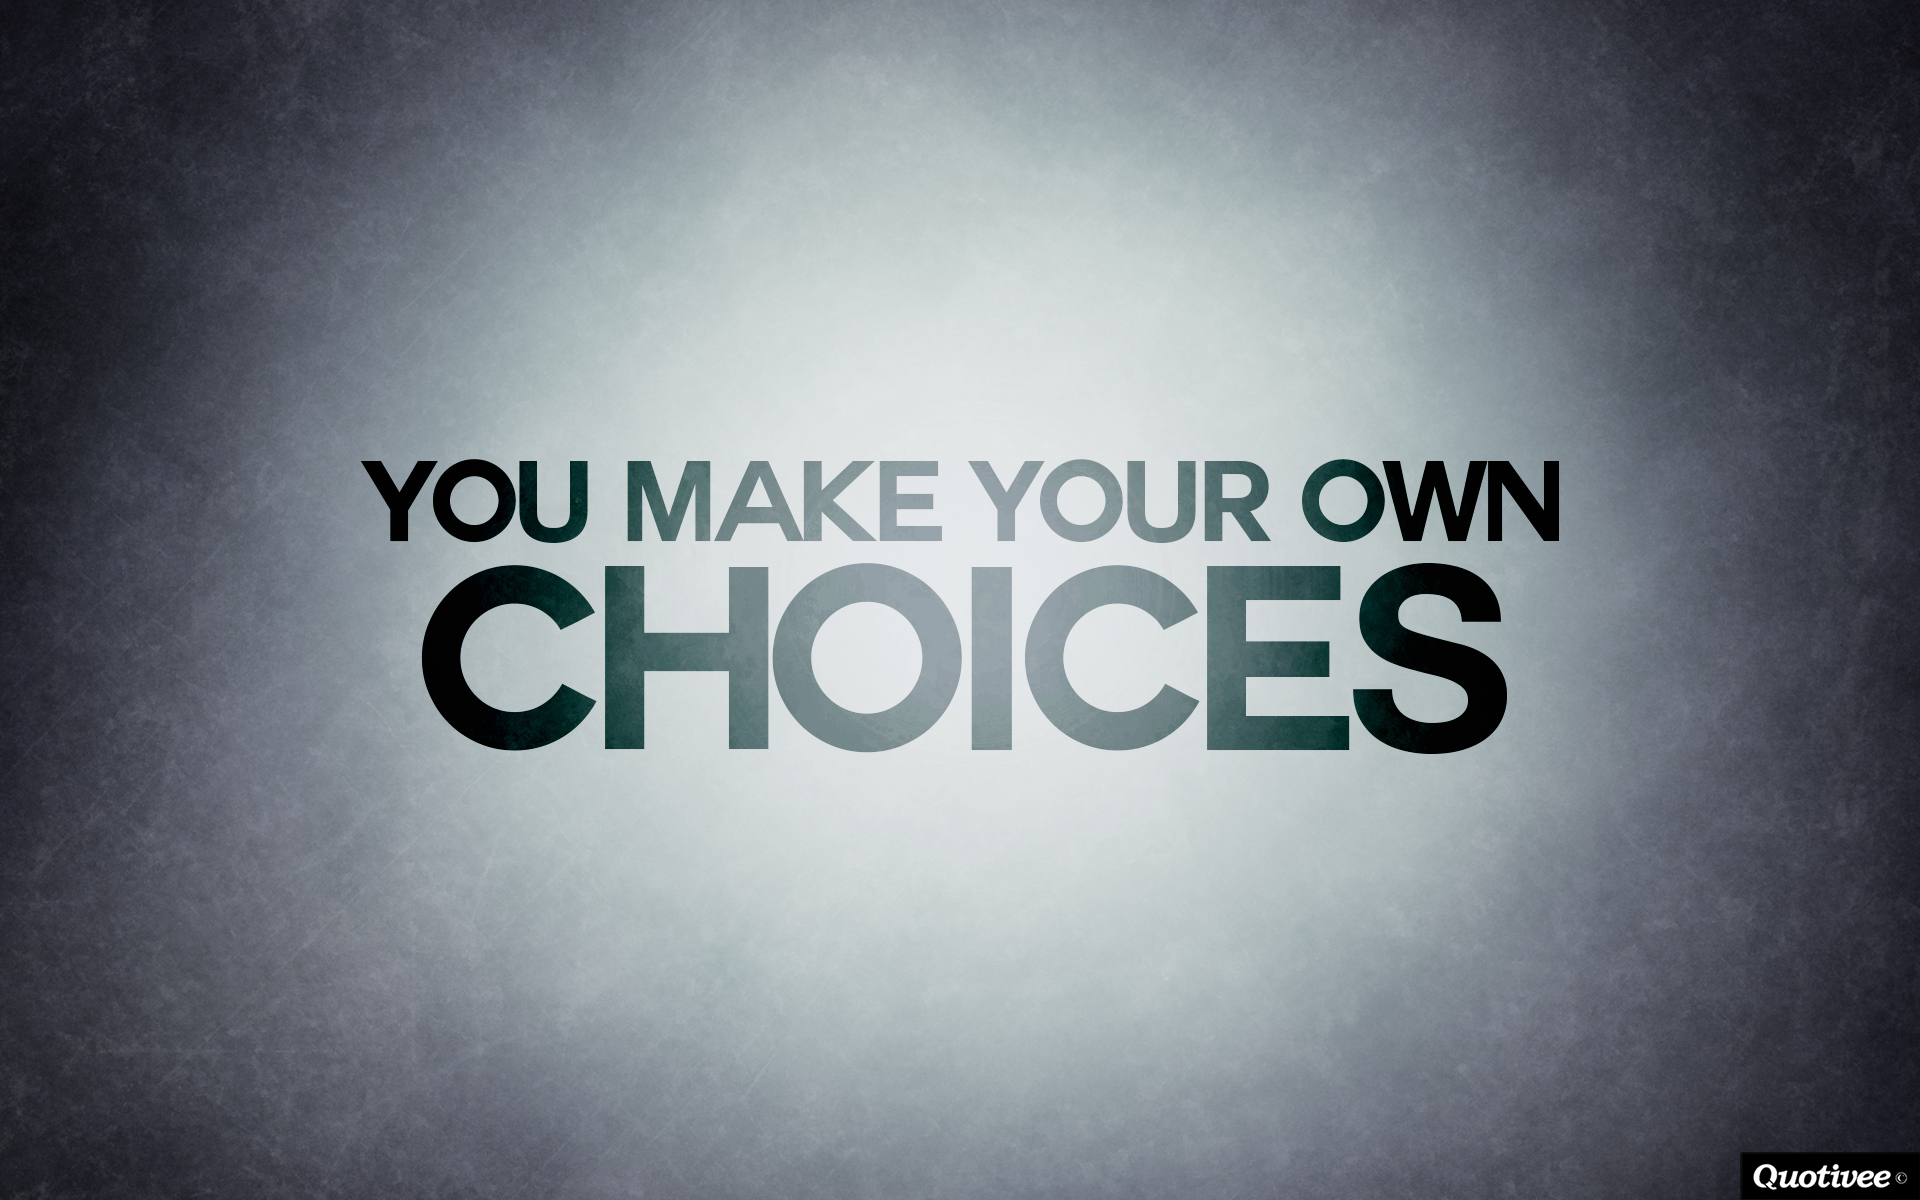 You Make Your Own Choices   Inspirational Quotes Quotivee